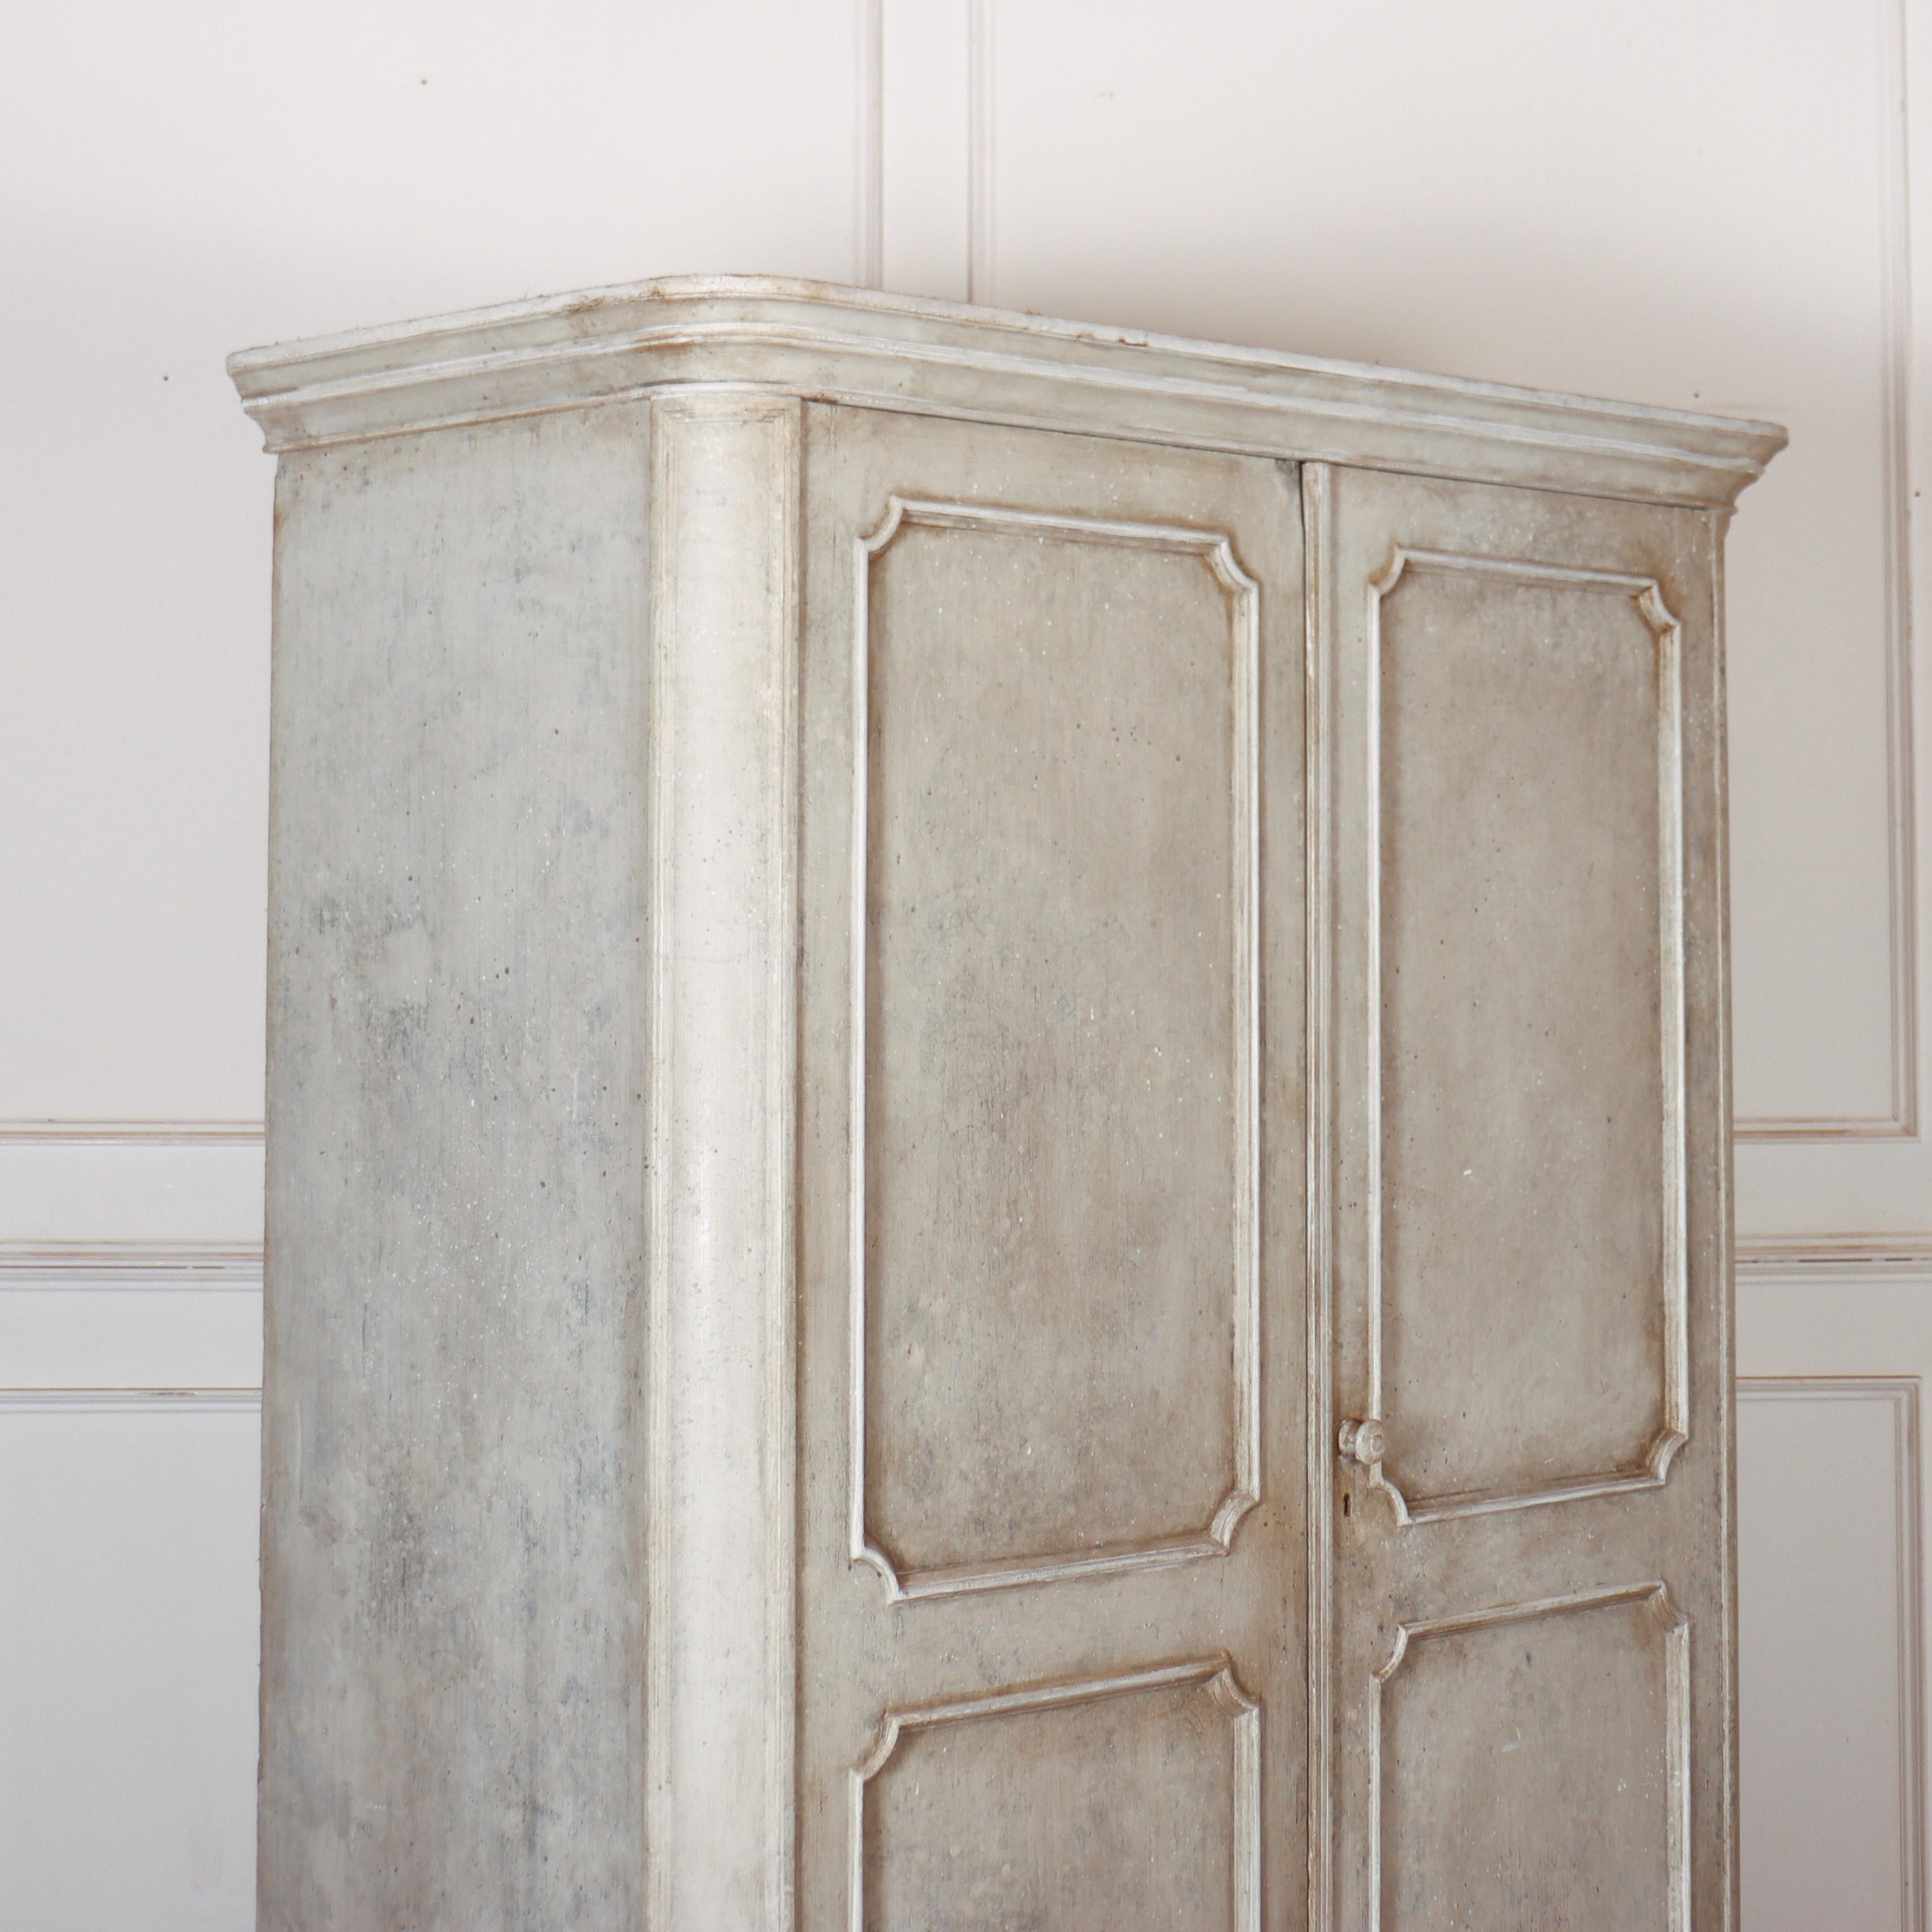 Good early 19th C English painted pine two door linen cupboard. 1830.

Reference: 8264

Dimensions
52 inches (132 cms) Wide
23 inches (58 cms) Deep
78 inches (198 cms) High